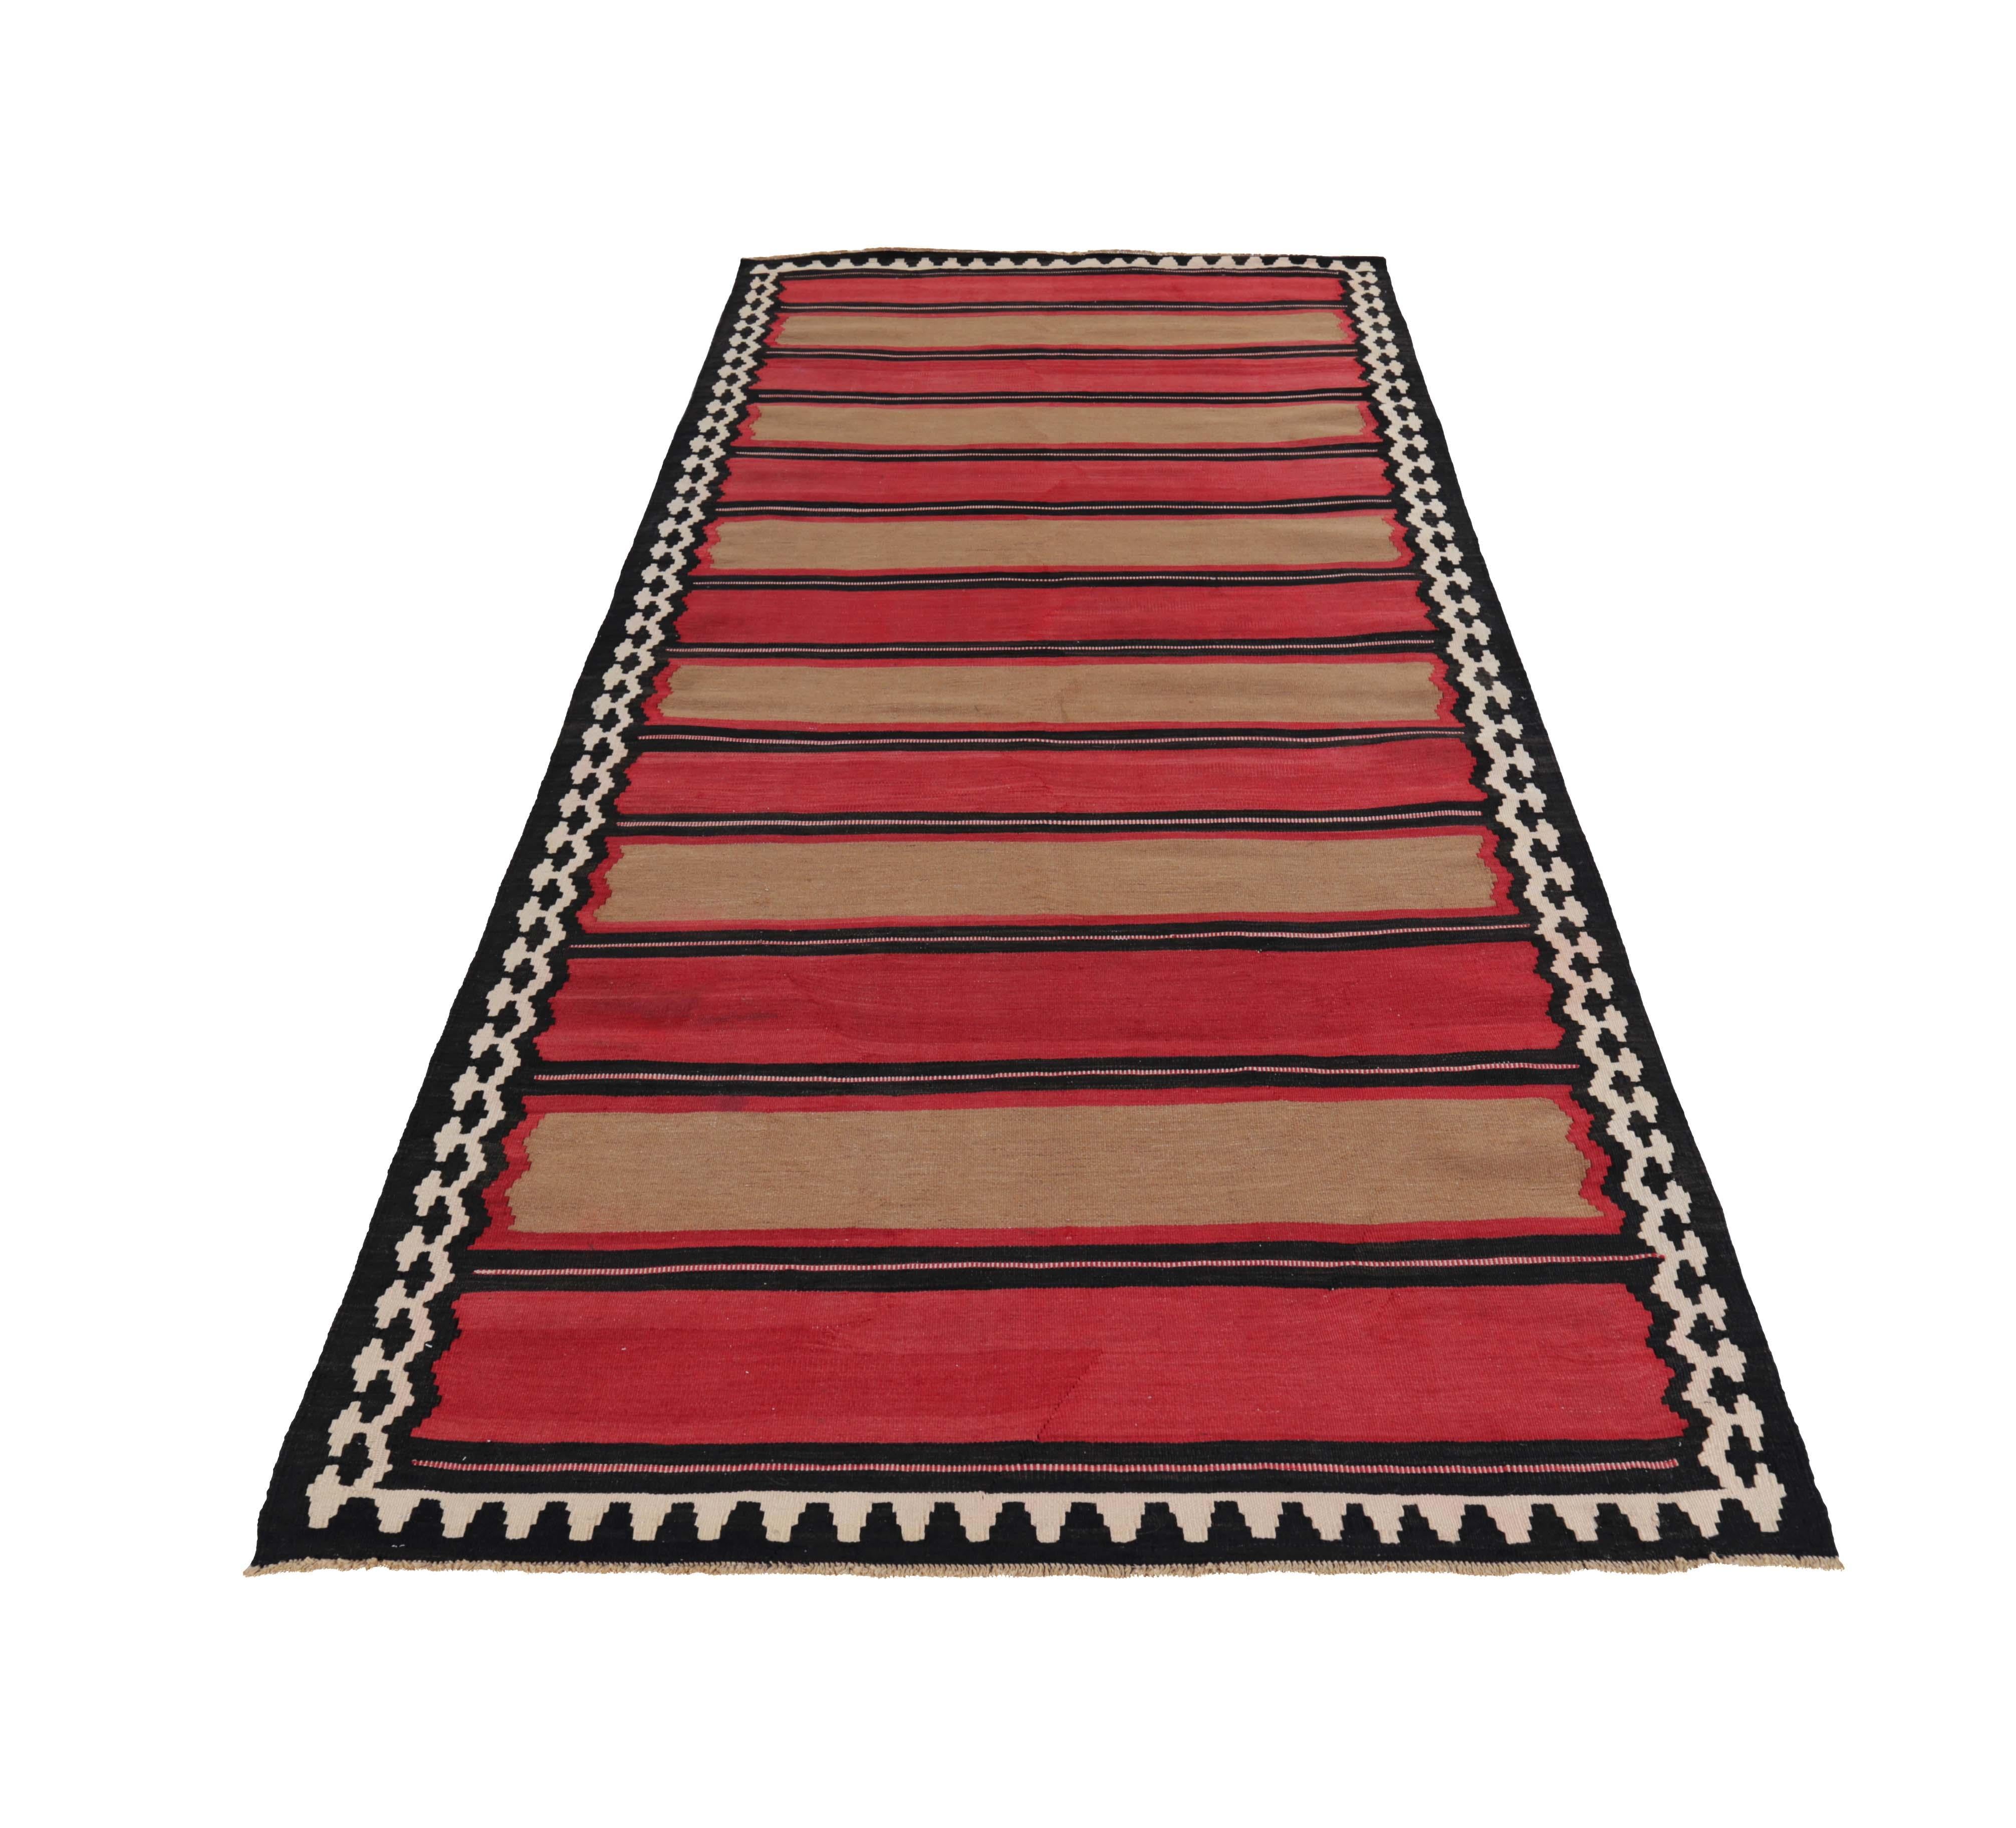 Turkish rug handwoven from the finest sheep’s wool and colored with all-natural vegetable dyes that are safe for humans and pets. It’s a traditional Kilim flat-weave design featuring red and brown block stripes in a black field. It’s a stunning